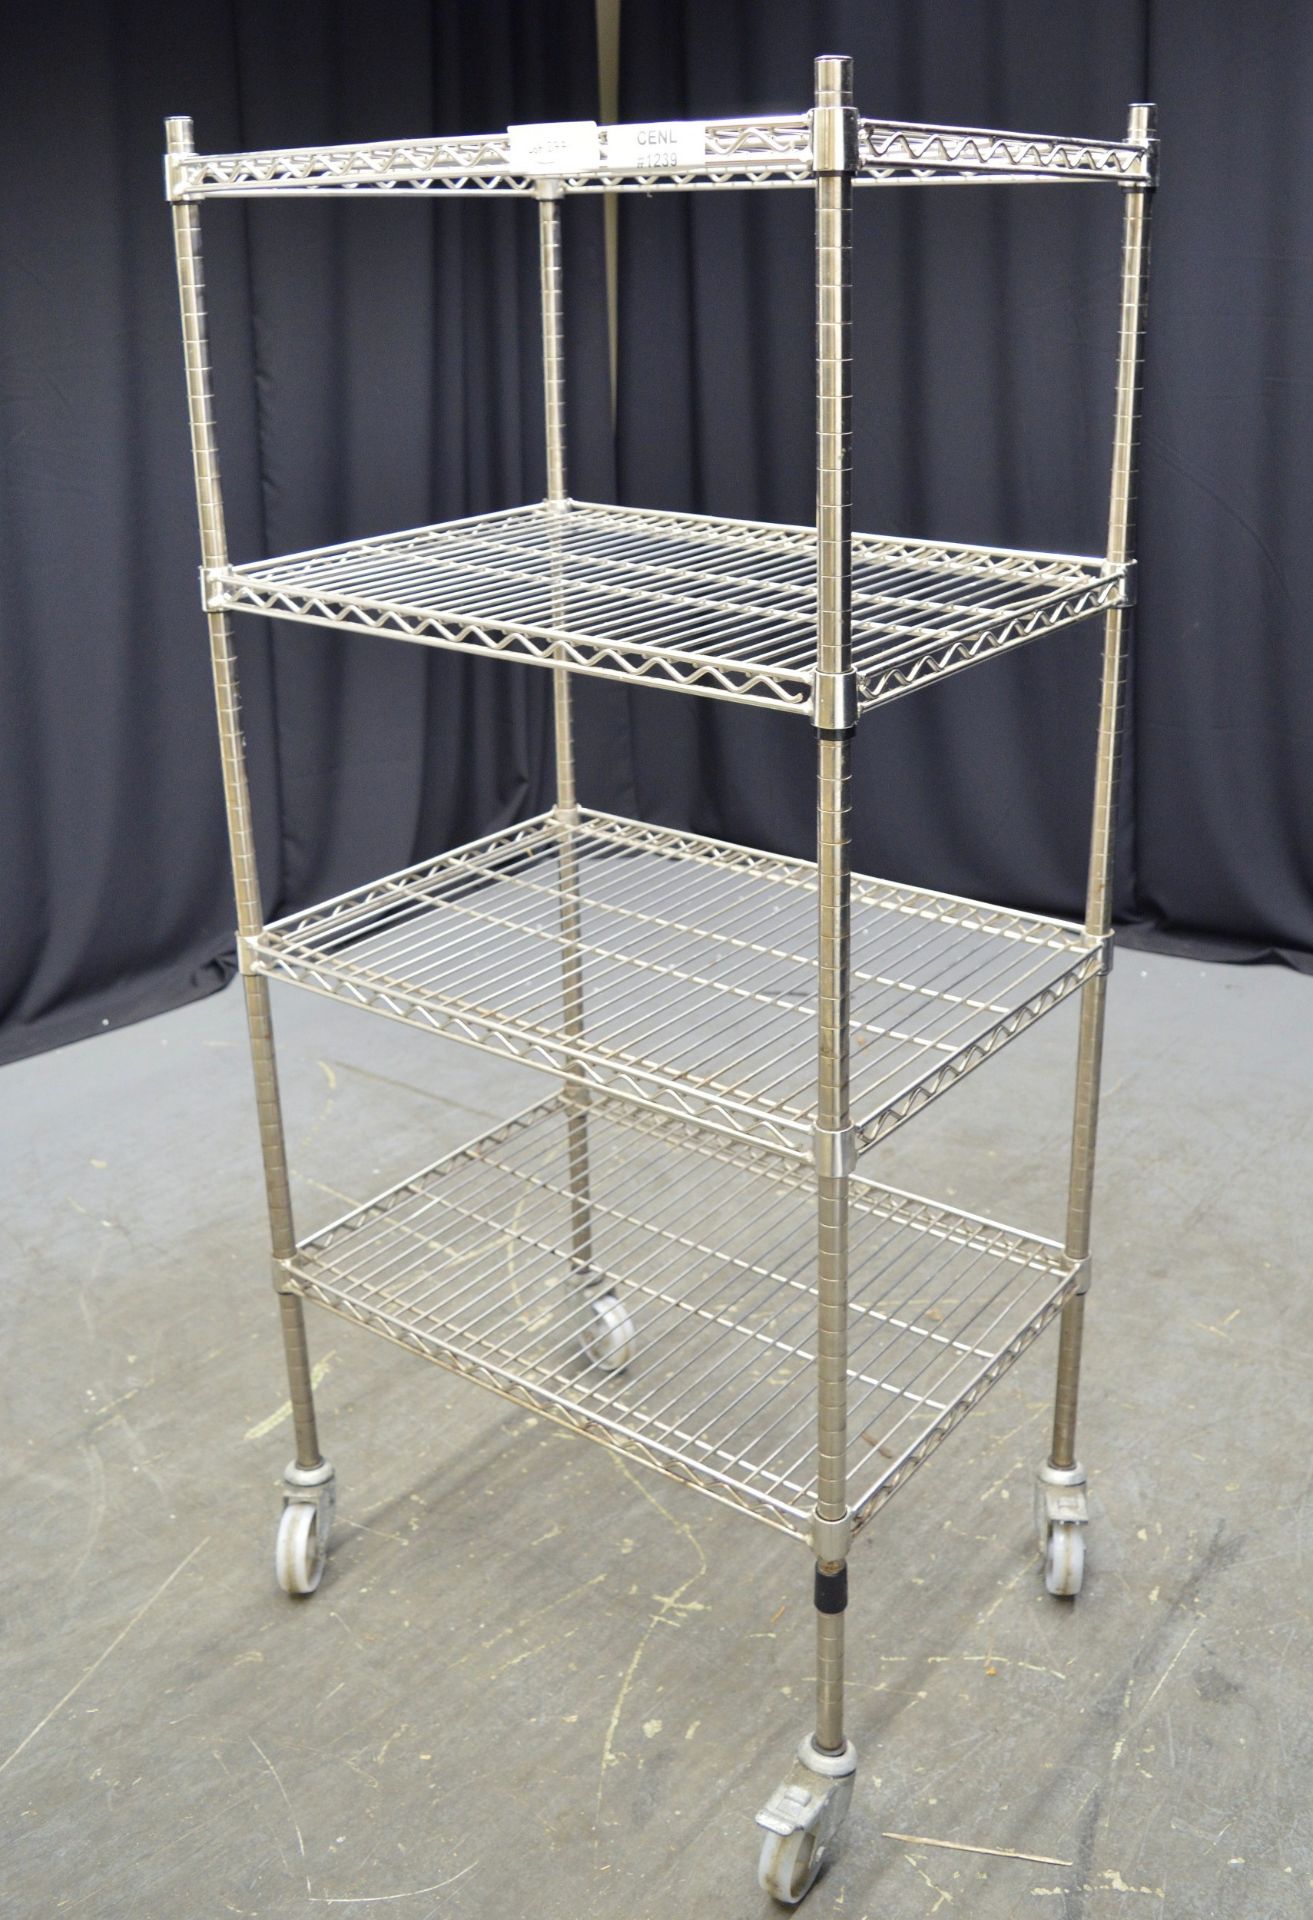 Stainless Steel 4 Tier Shelving Unit on Wheels - L745 x W540 x H1600mm - Image 3 of 3